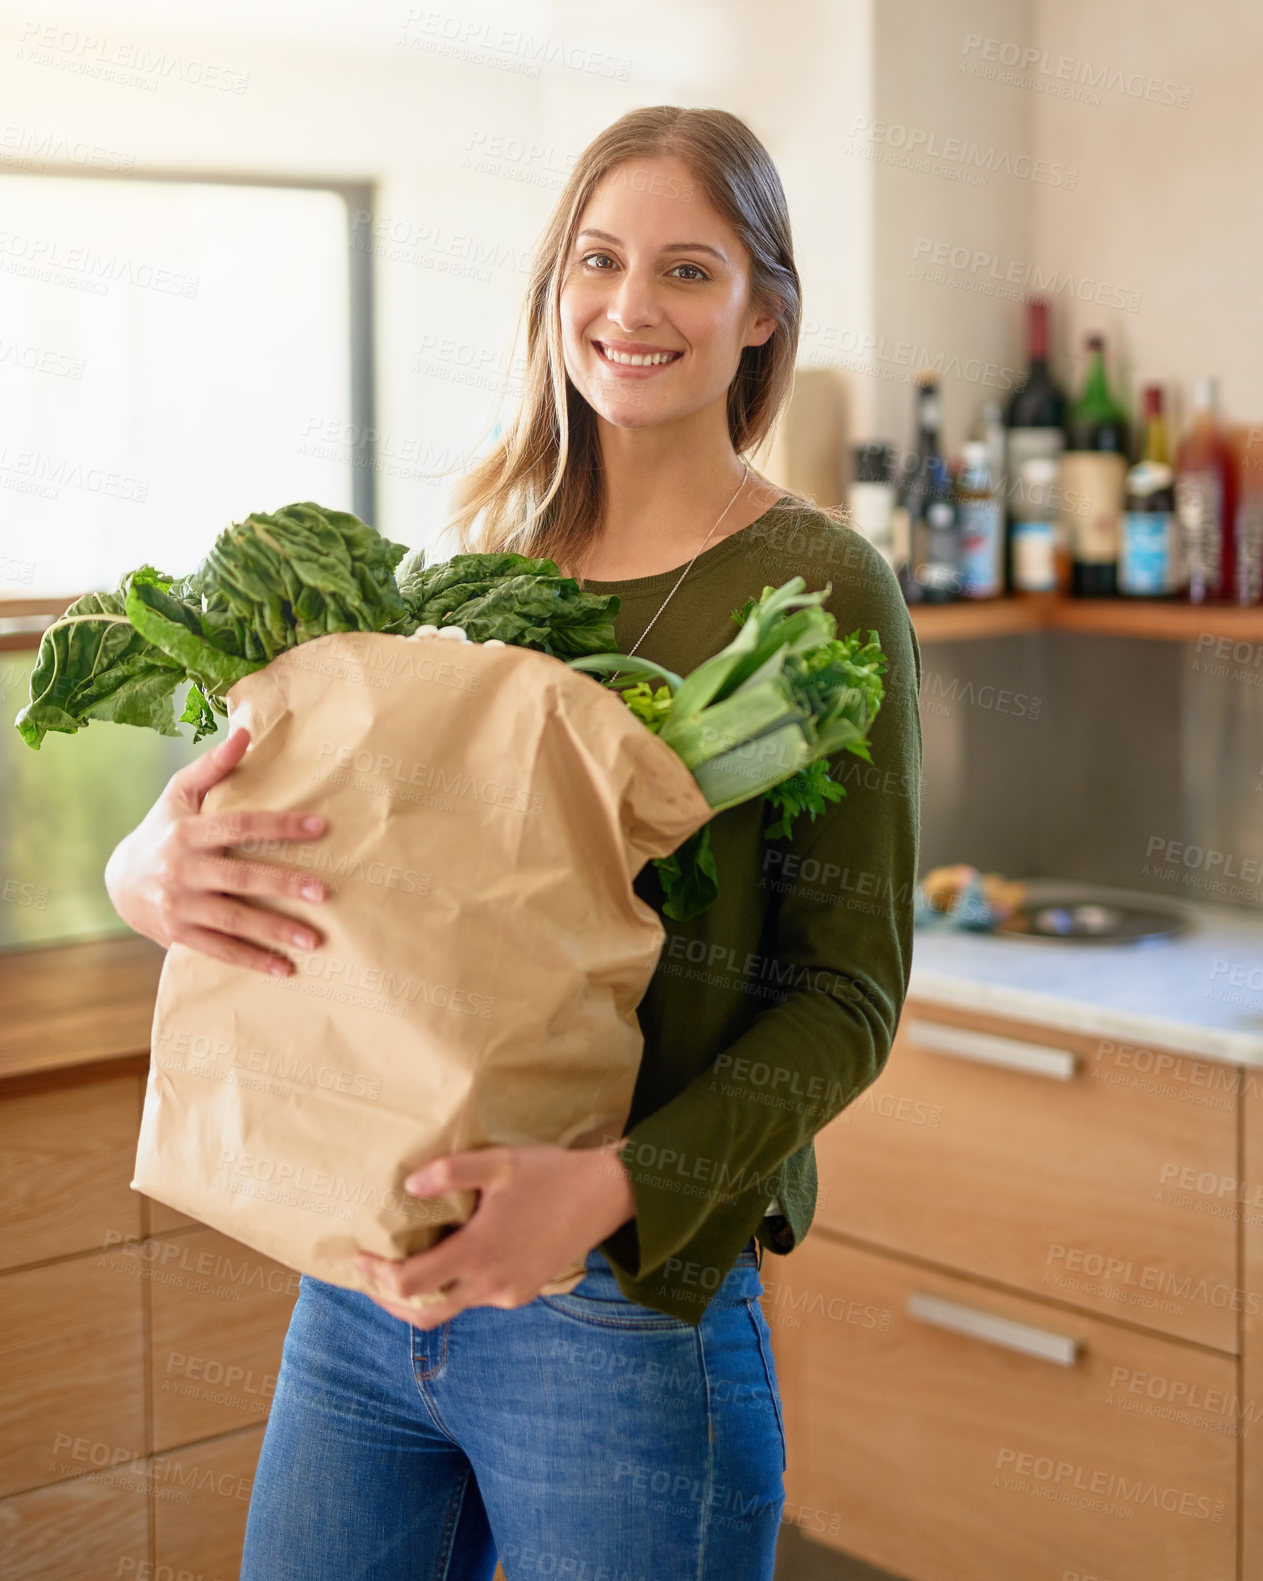 Buy stock photo Portrait of a smiling young woman standing in her kitchen carrying a paper bag full of groceries